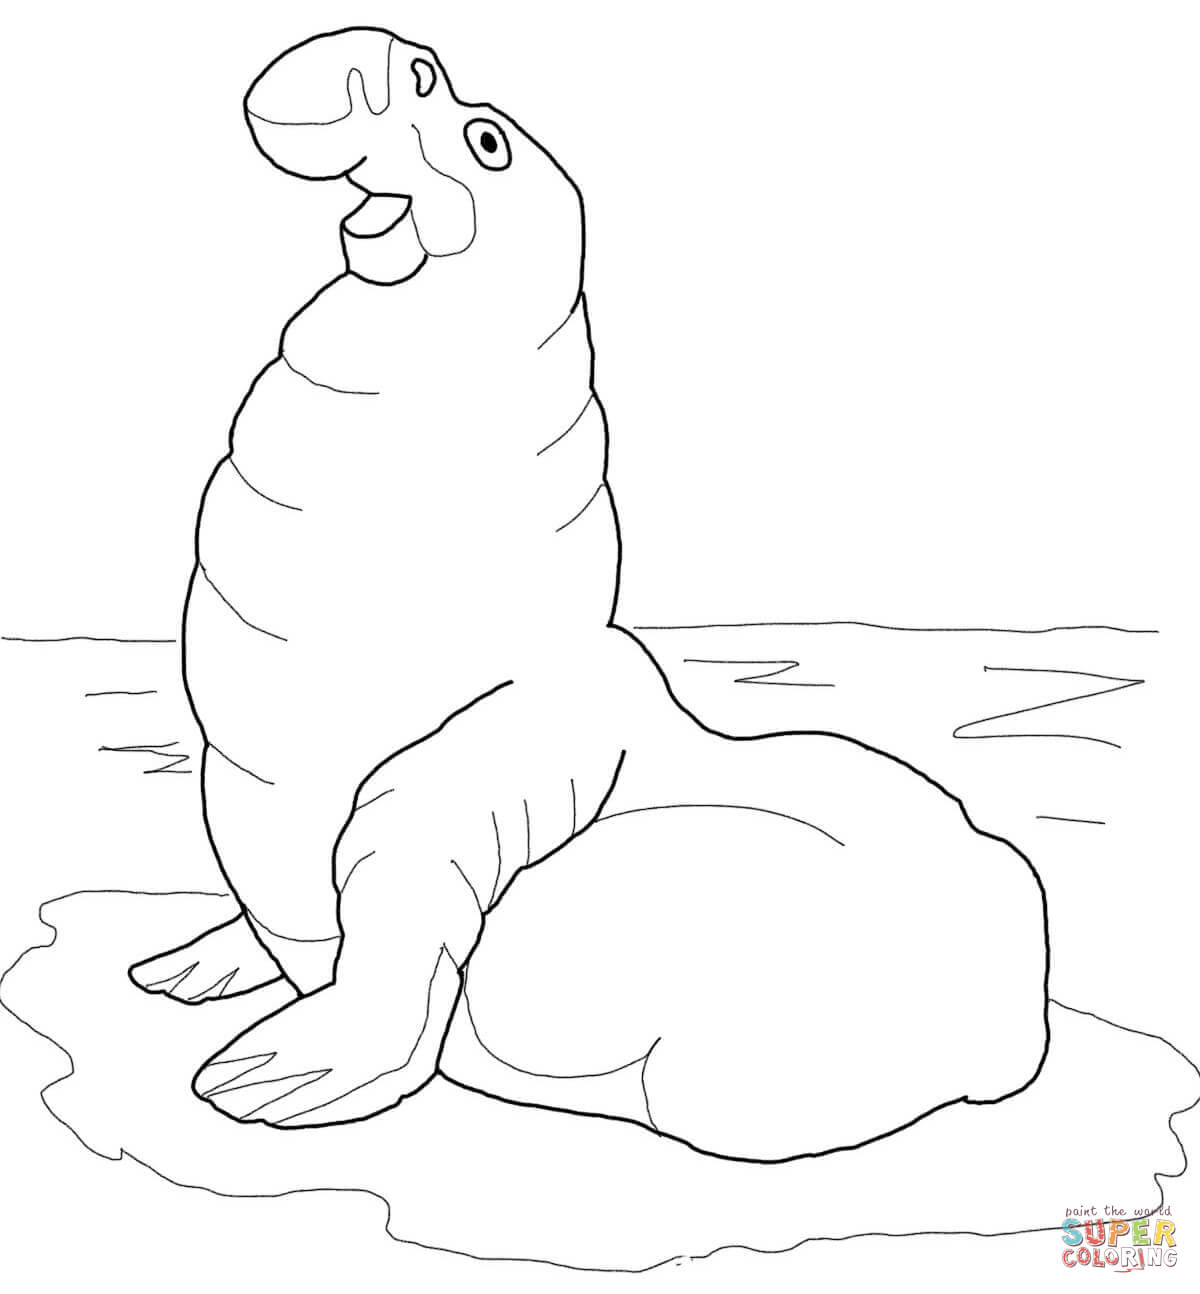 Elephant Seal coloring #14, Download drawings